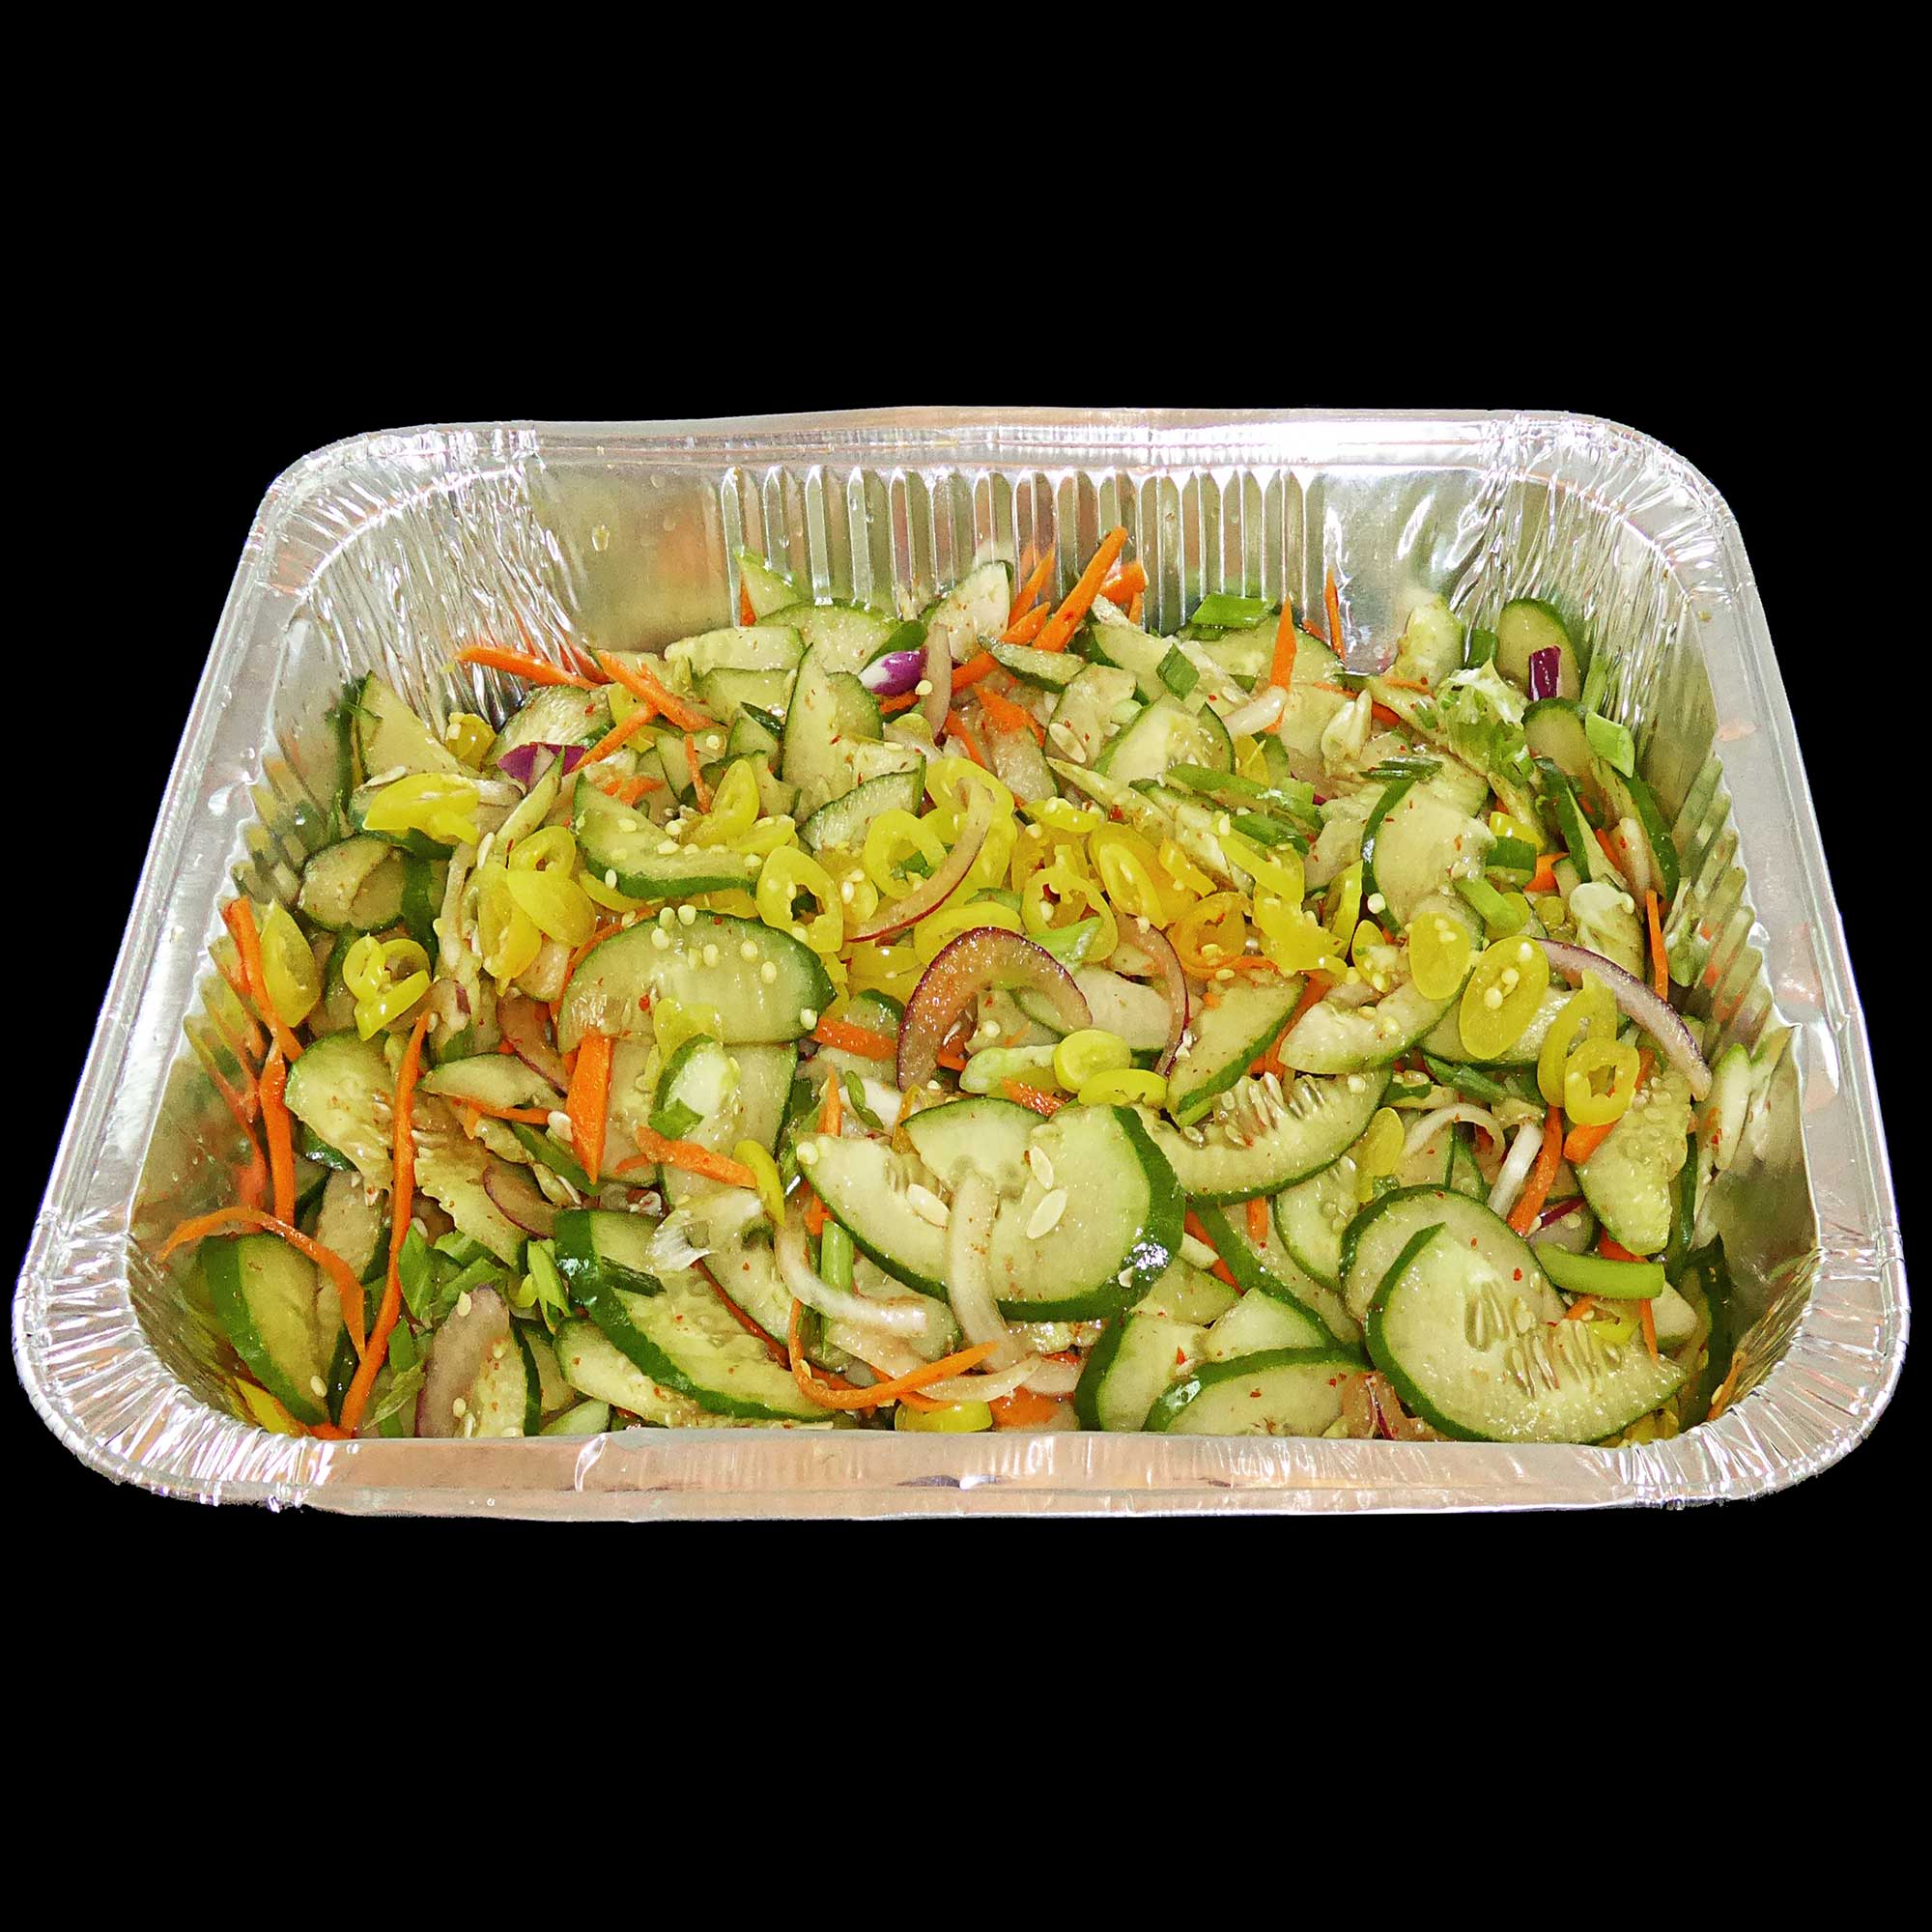 Pika Salad&nbsp;&nbsp;<strong style="font-size: 20px;"><span style="color: rgb(255, 0, 0);"><span style="font-family: Calibri, sans-serif;">New!</span></span></strong>